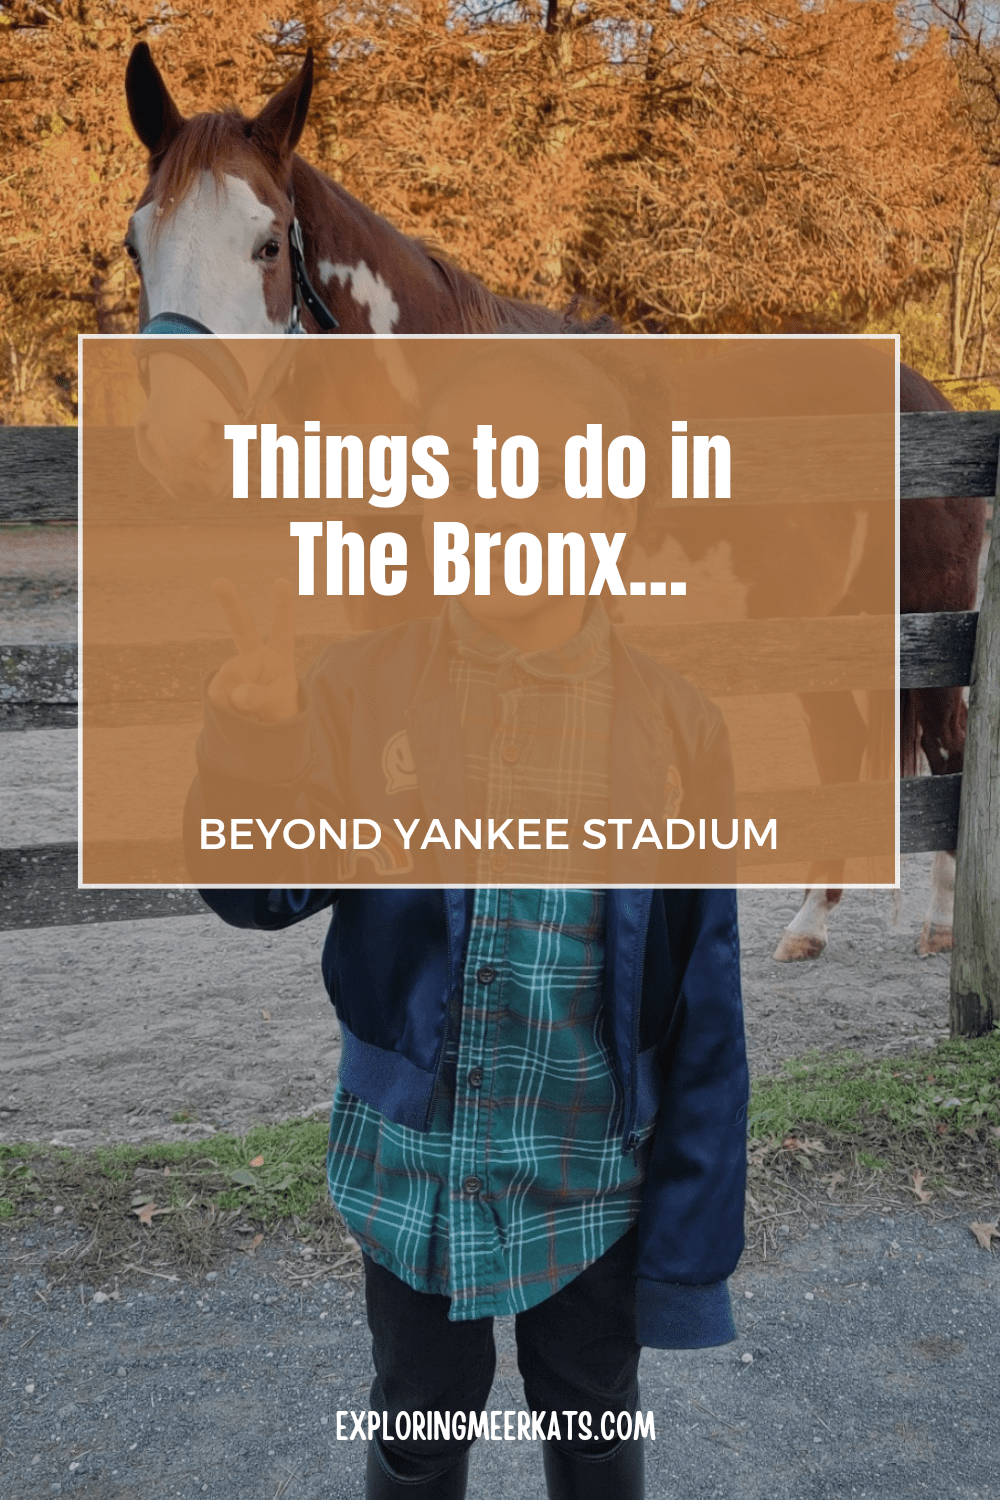 Things to do in The Bronx